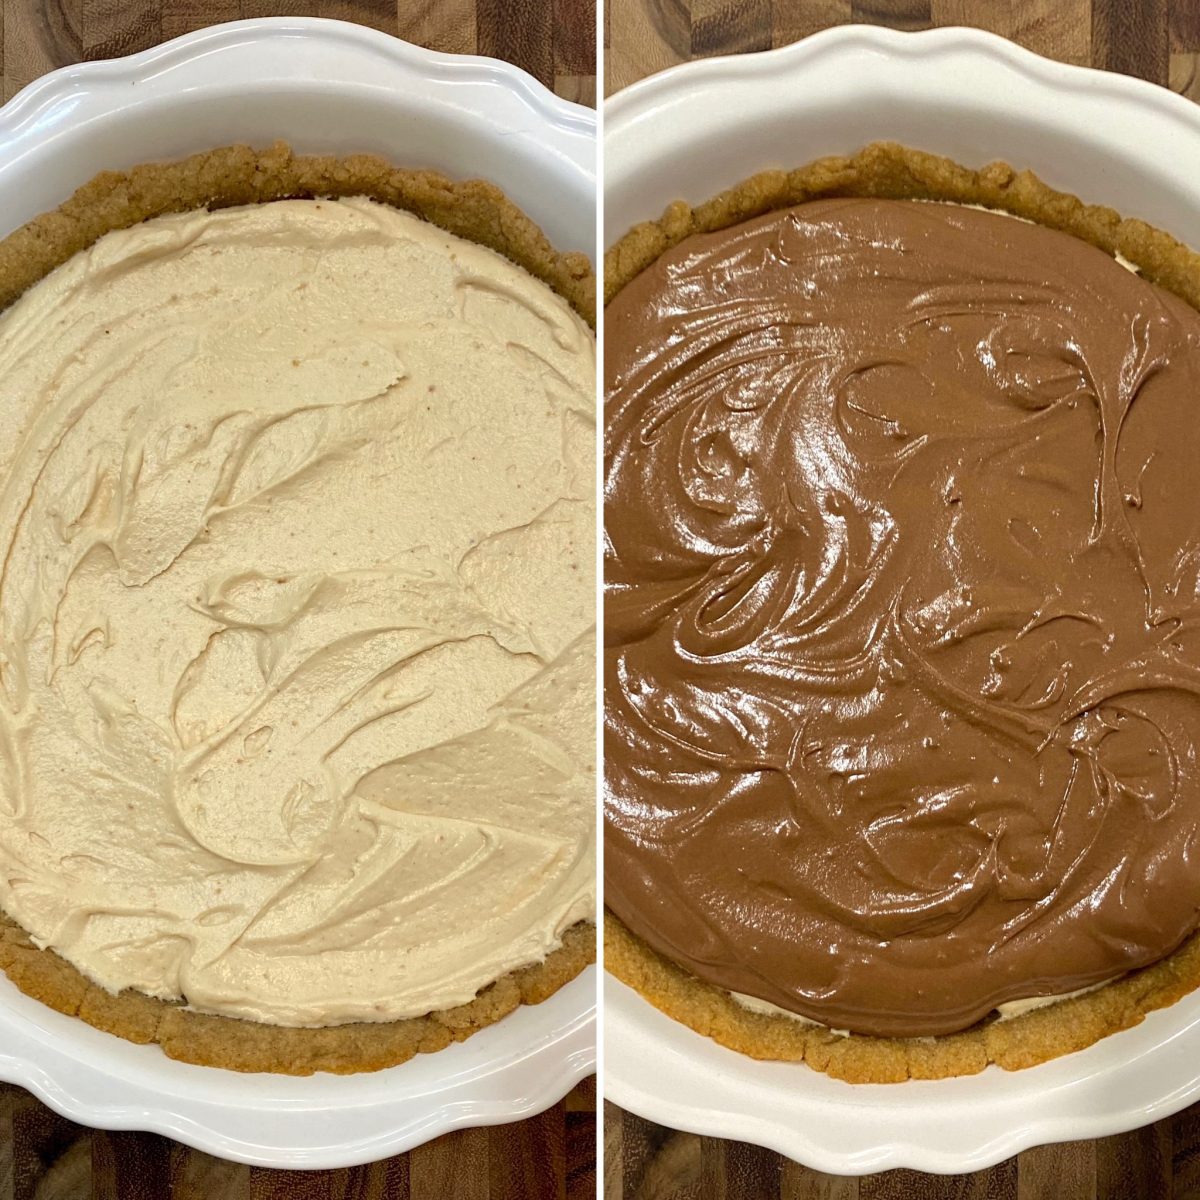 two photos. the peanut butter and the chocolate layer of the pie, side by side.